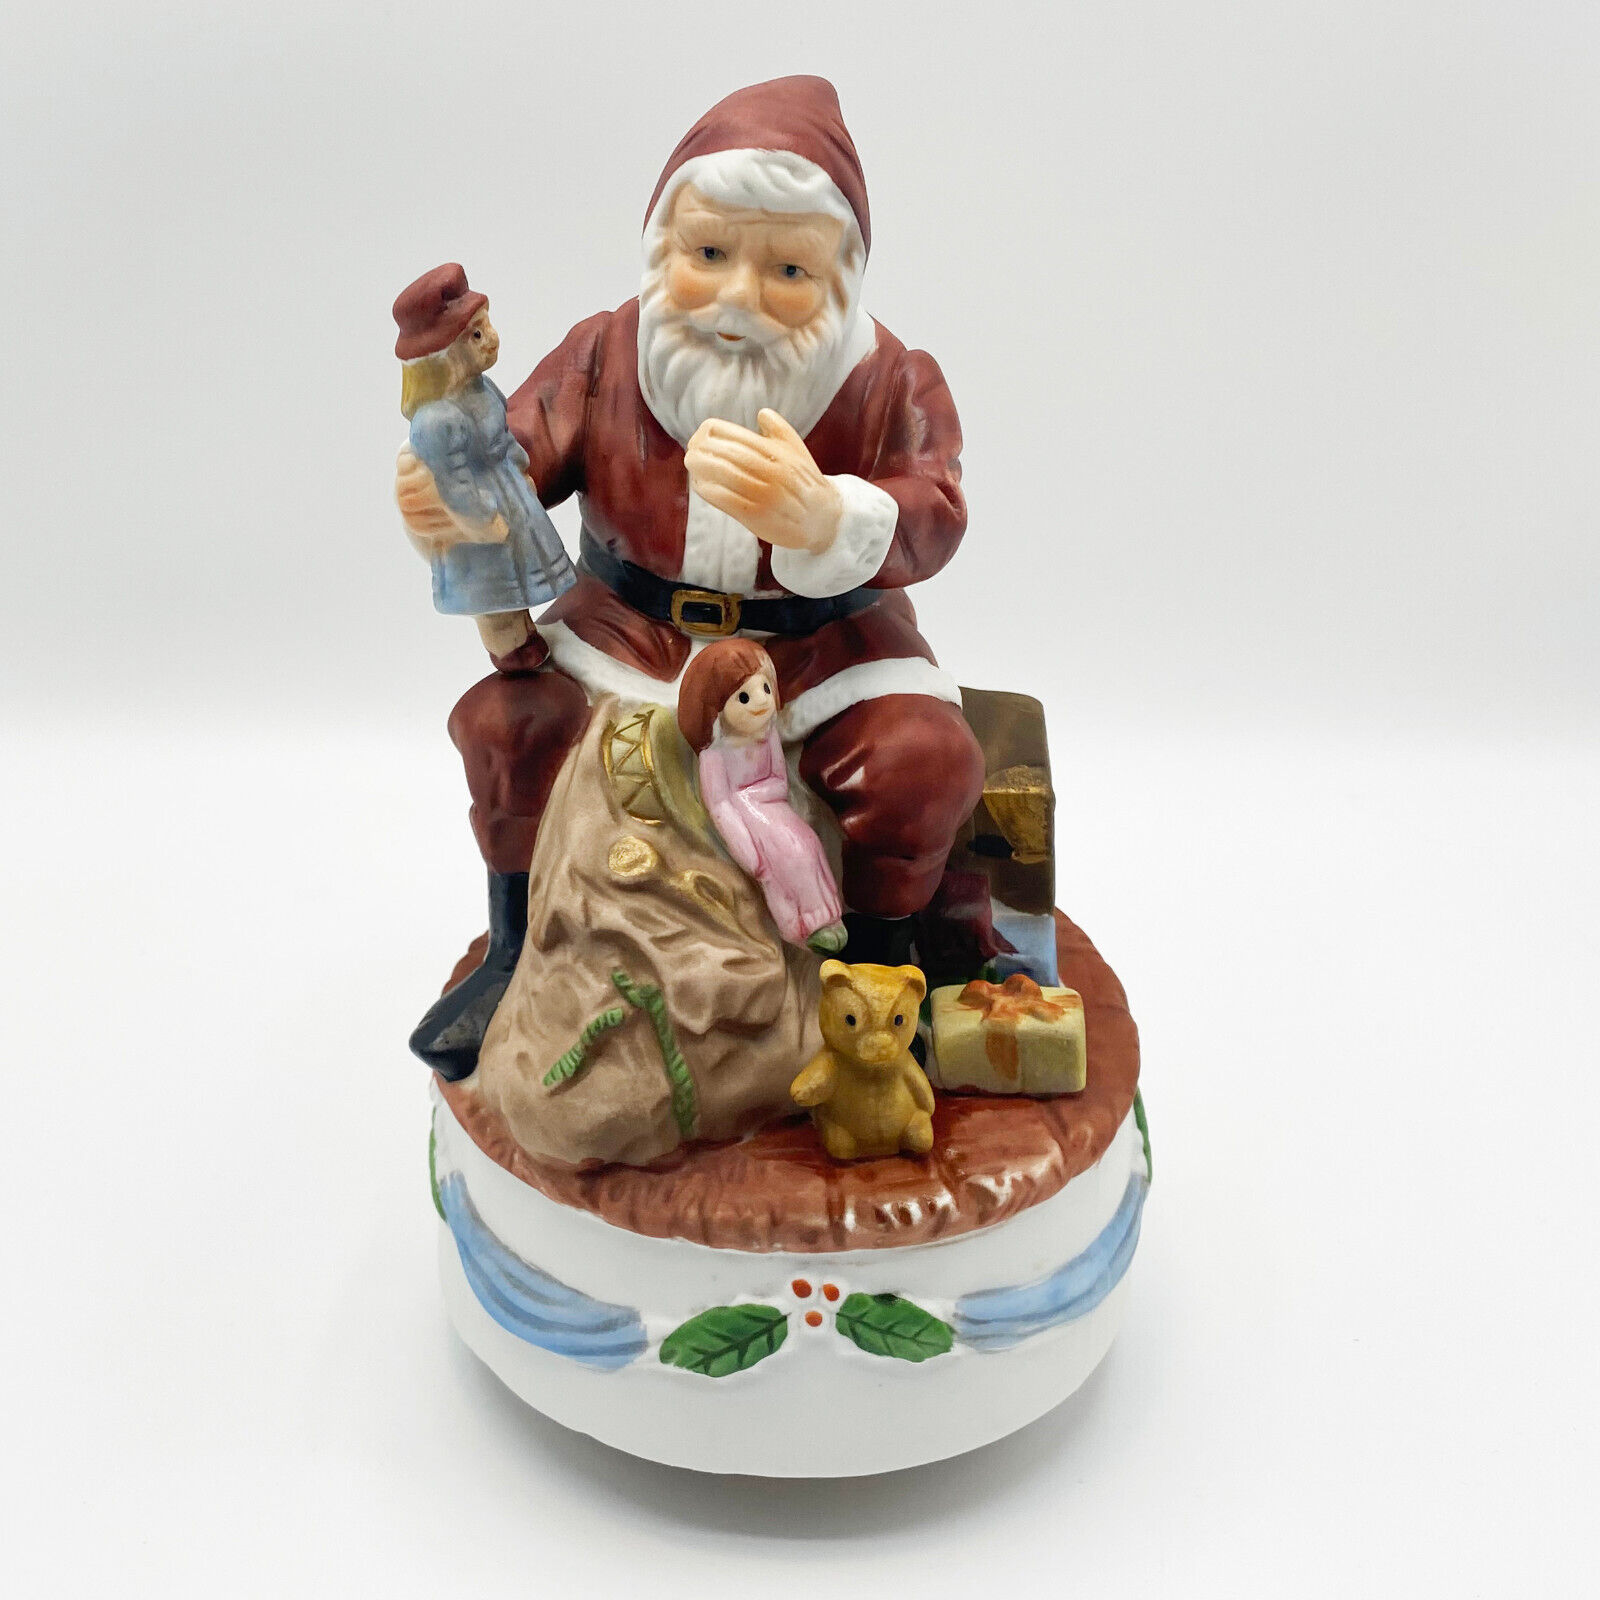 Vintage Music Box Santa in Red Suit Holding Toy Dolls - Plays \